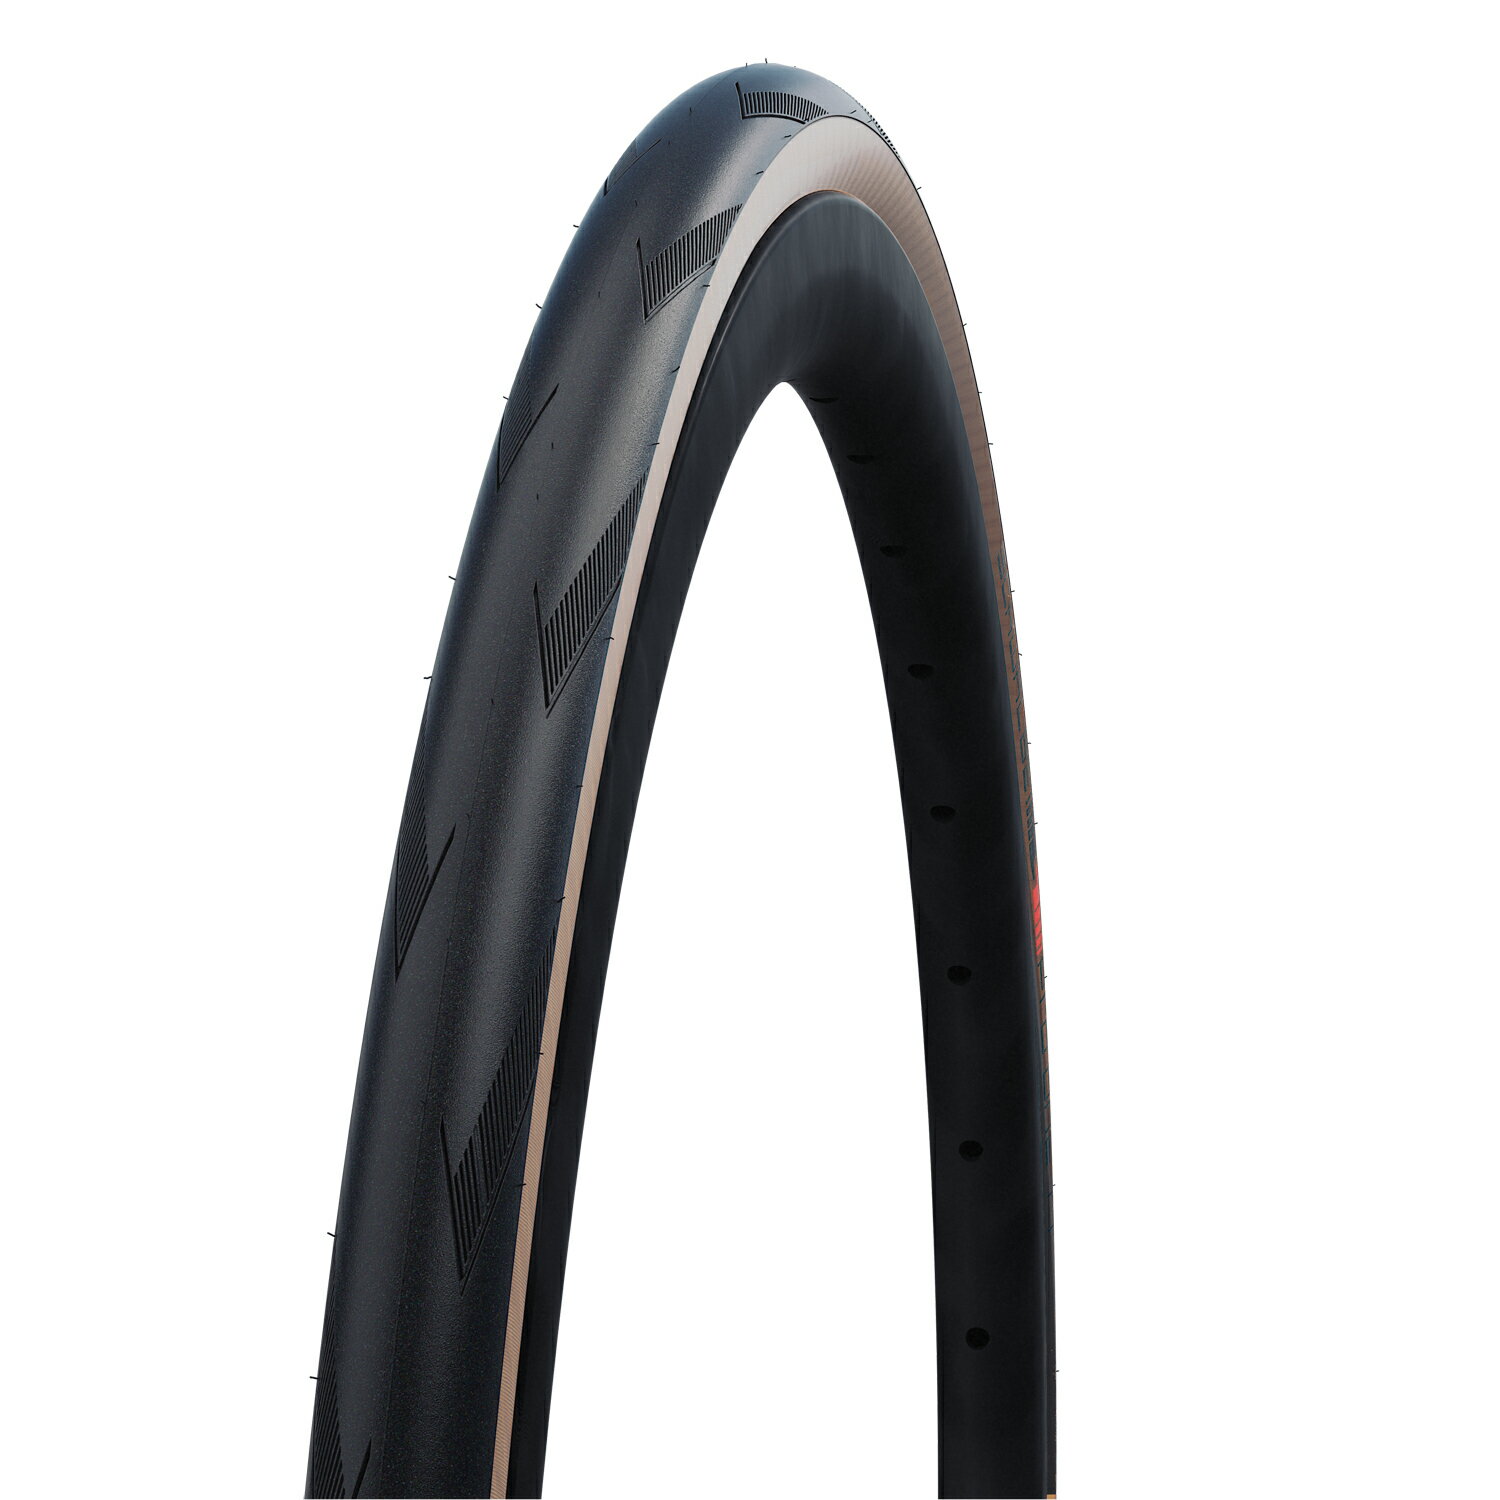 [K㗝Xi] SCHWALBE(Vx) PRO ONE TLE(v TUBELESS EASY `[uXC[W[) [hoCNp ^C ugXyAgXLv 700C 700~32C SW11654238ykCEEn zsz